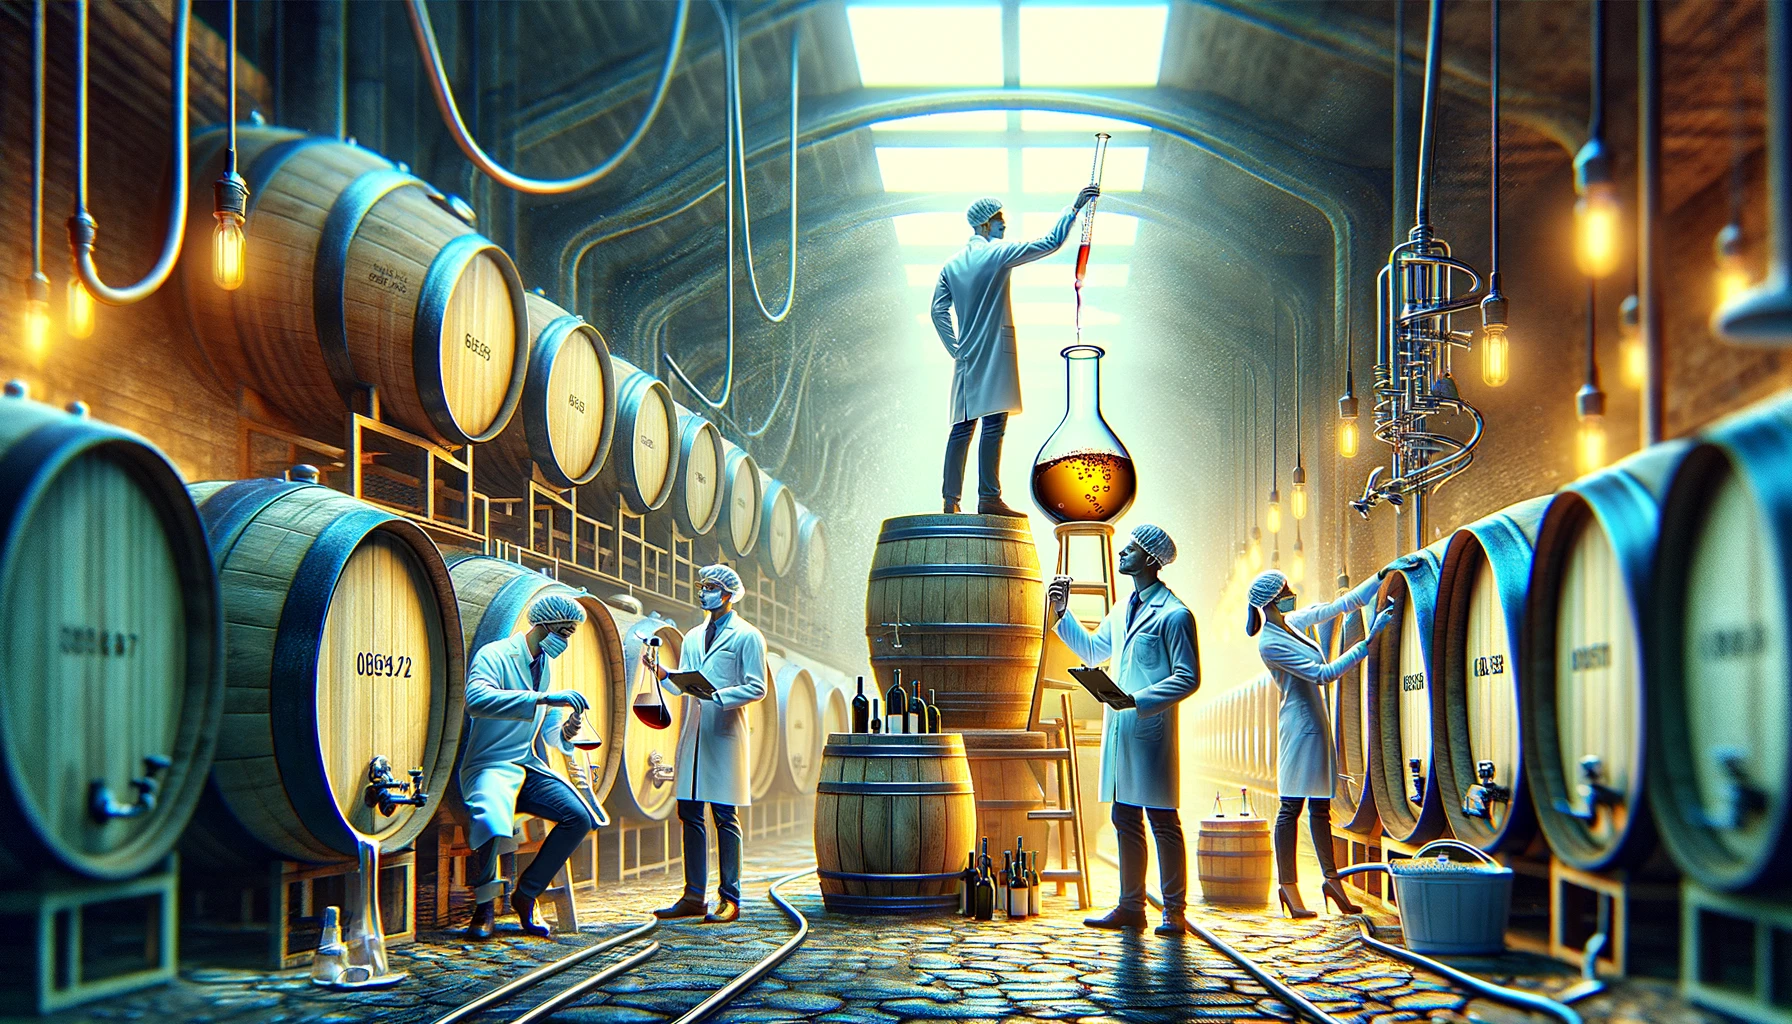 Winemakers testing the acid found in white wine after the alcoholic fermentation process has completed.